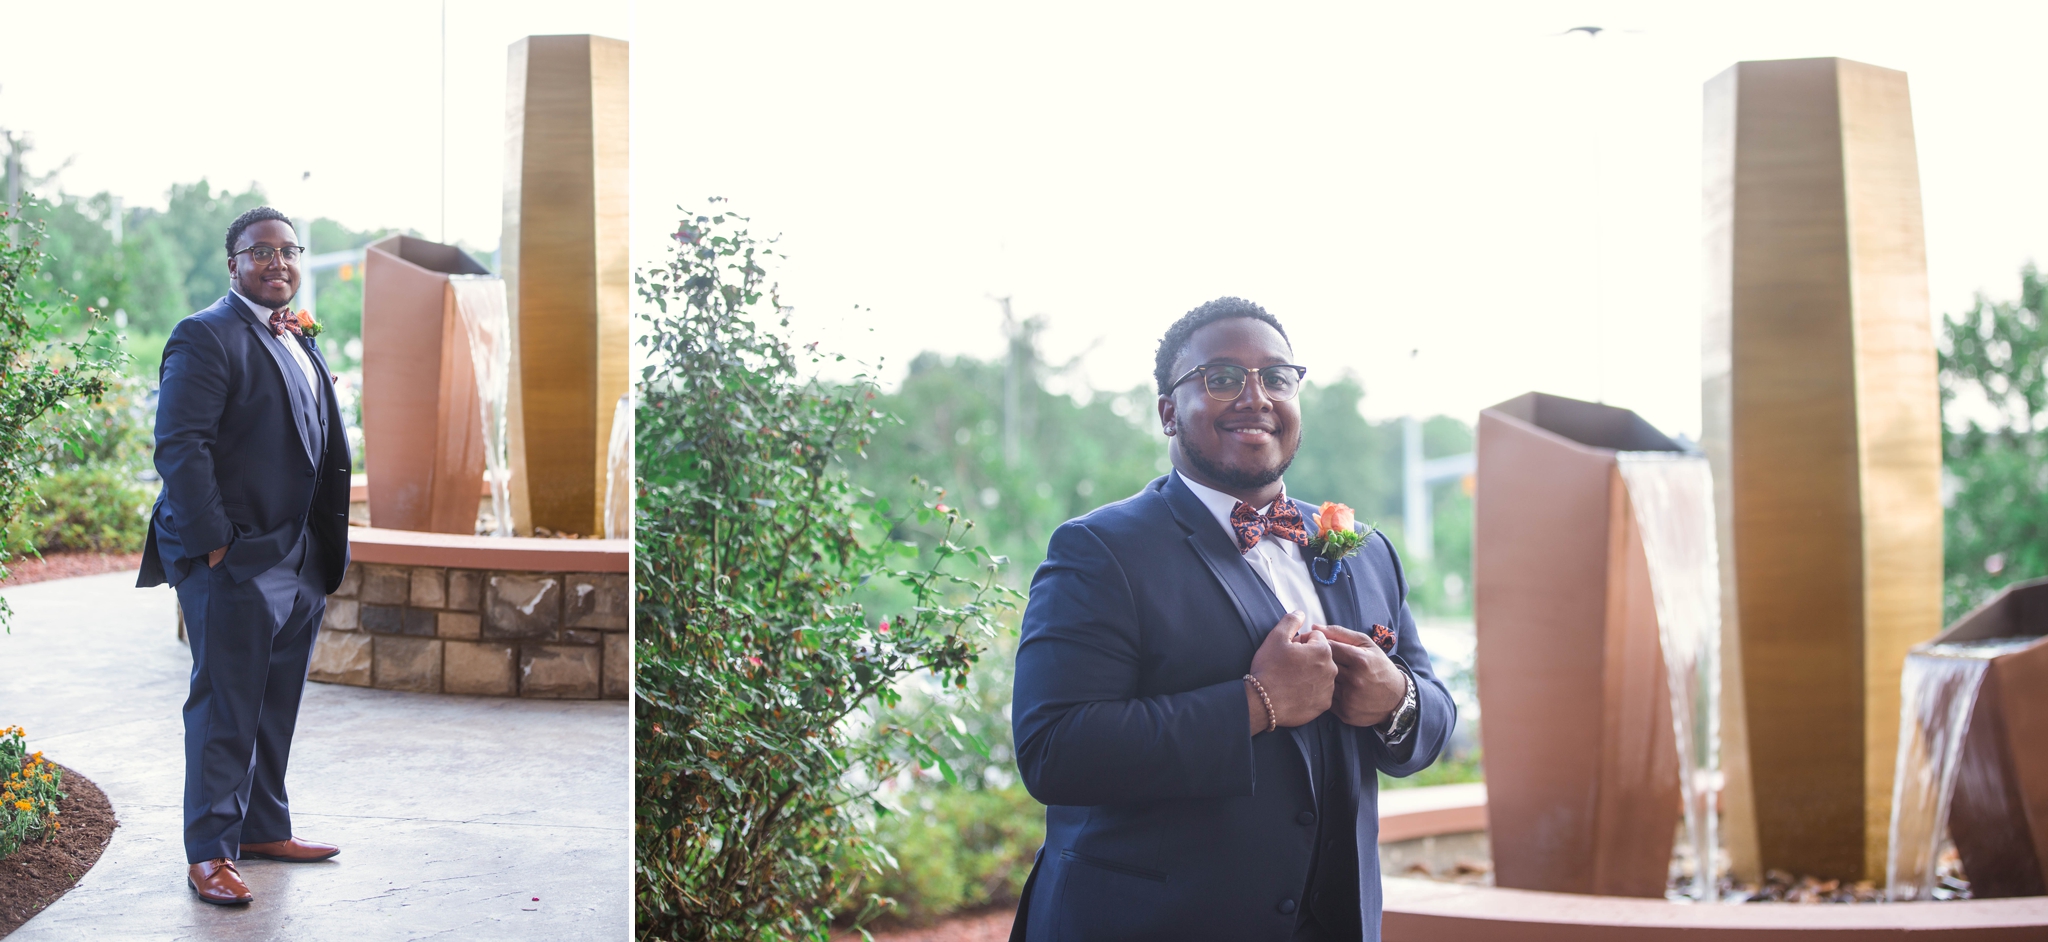 Wedding Photography at the Embassy Suites in Fayetteville North Carolina - Raleigh Photographer